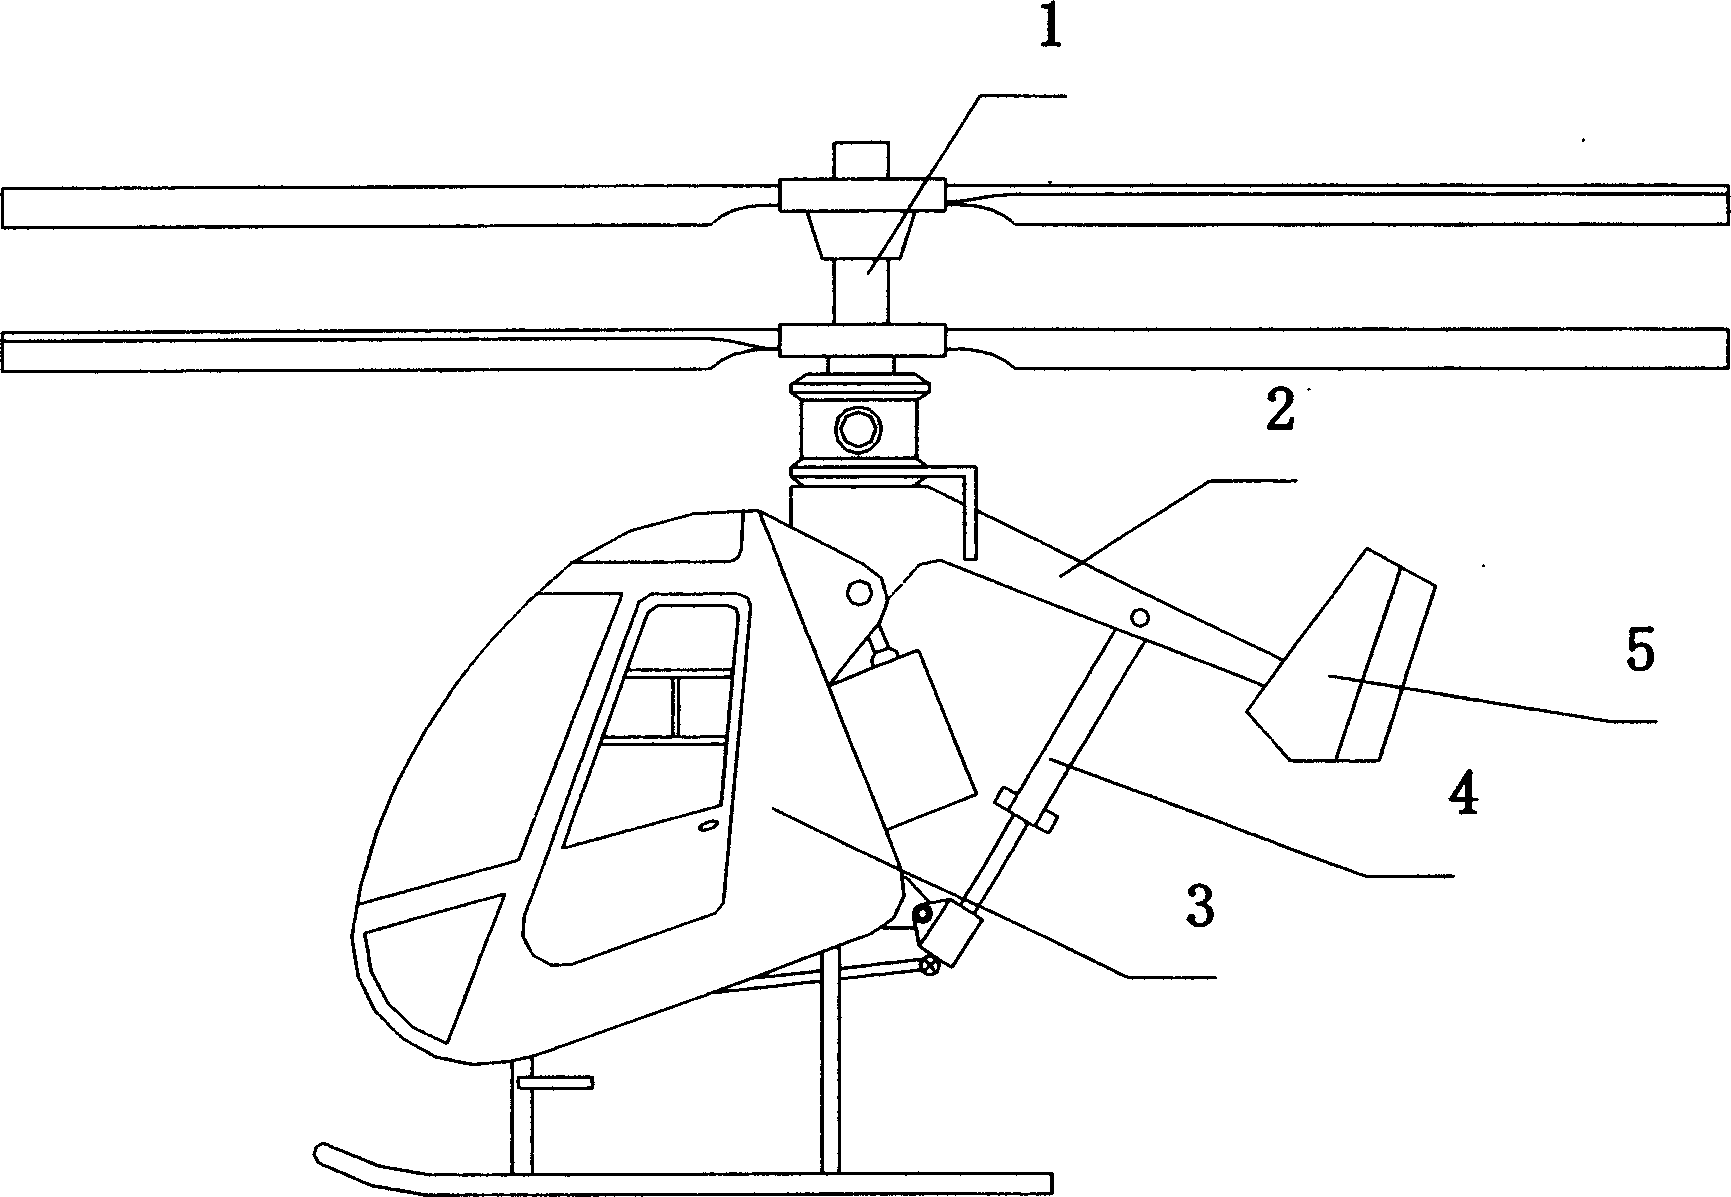 Rotor shaft controllable tilting coaxial rotor wing helicopter